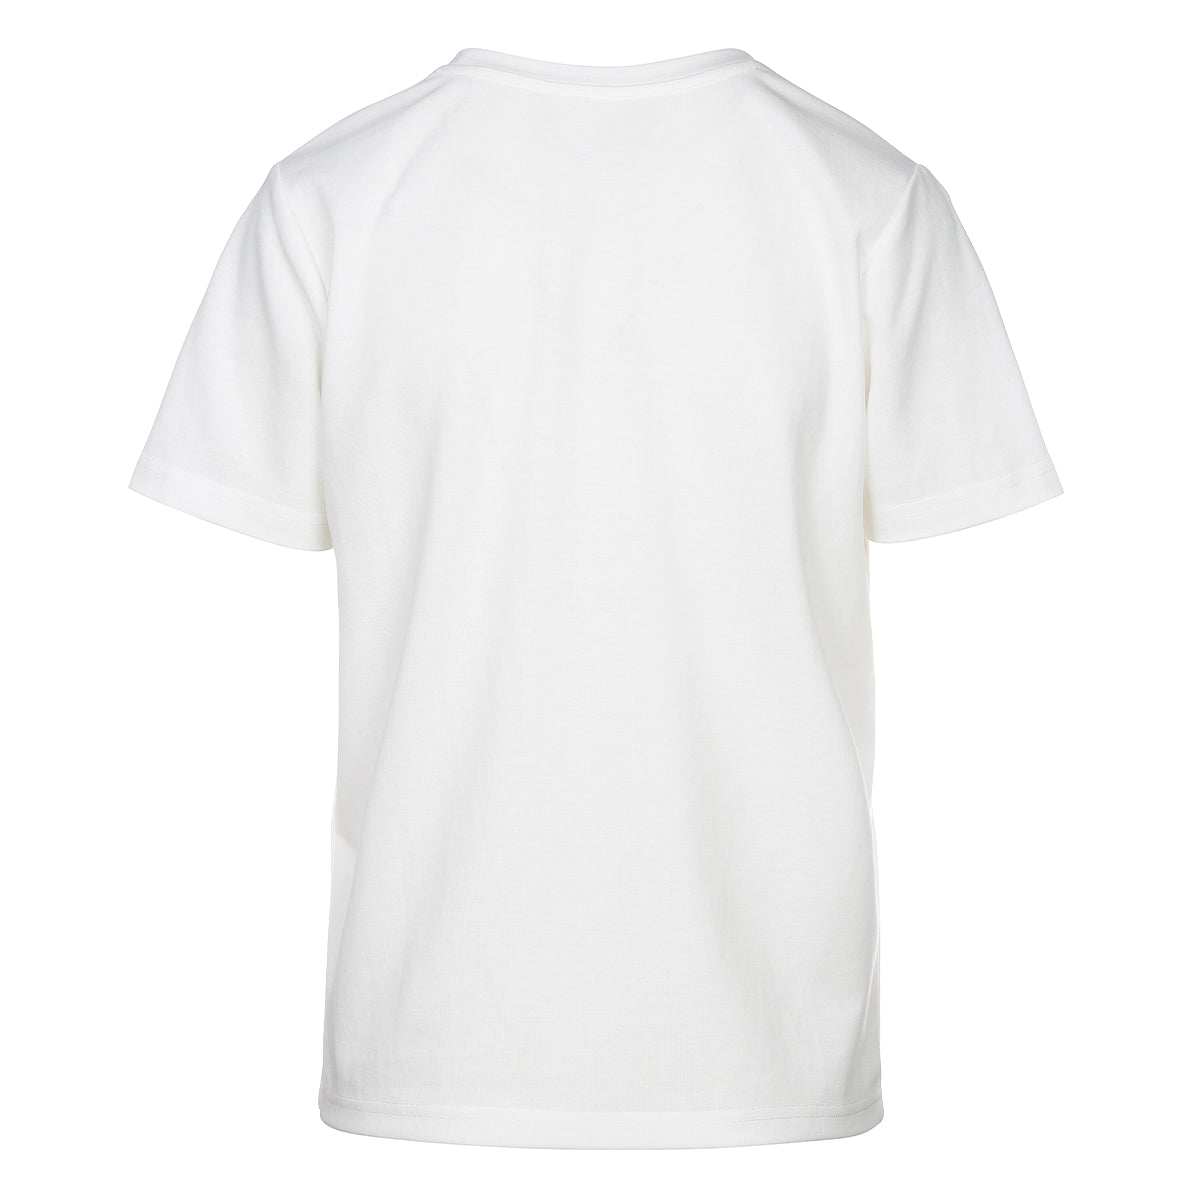 LUXZUZ // ONE TWO Timo T-Shirt T-Shirt 737 Cream